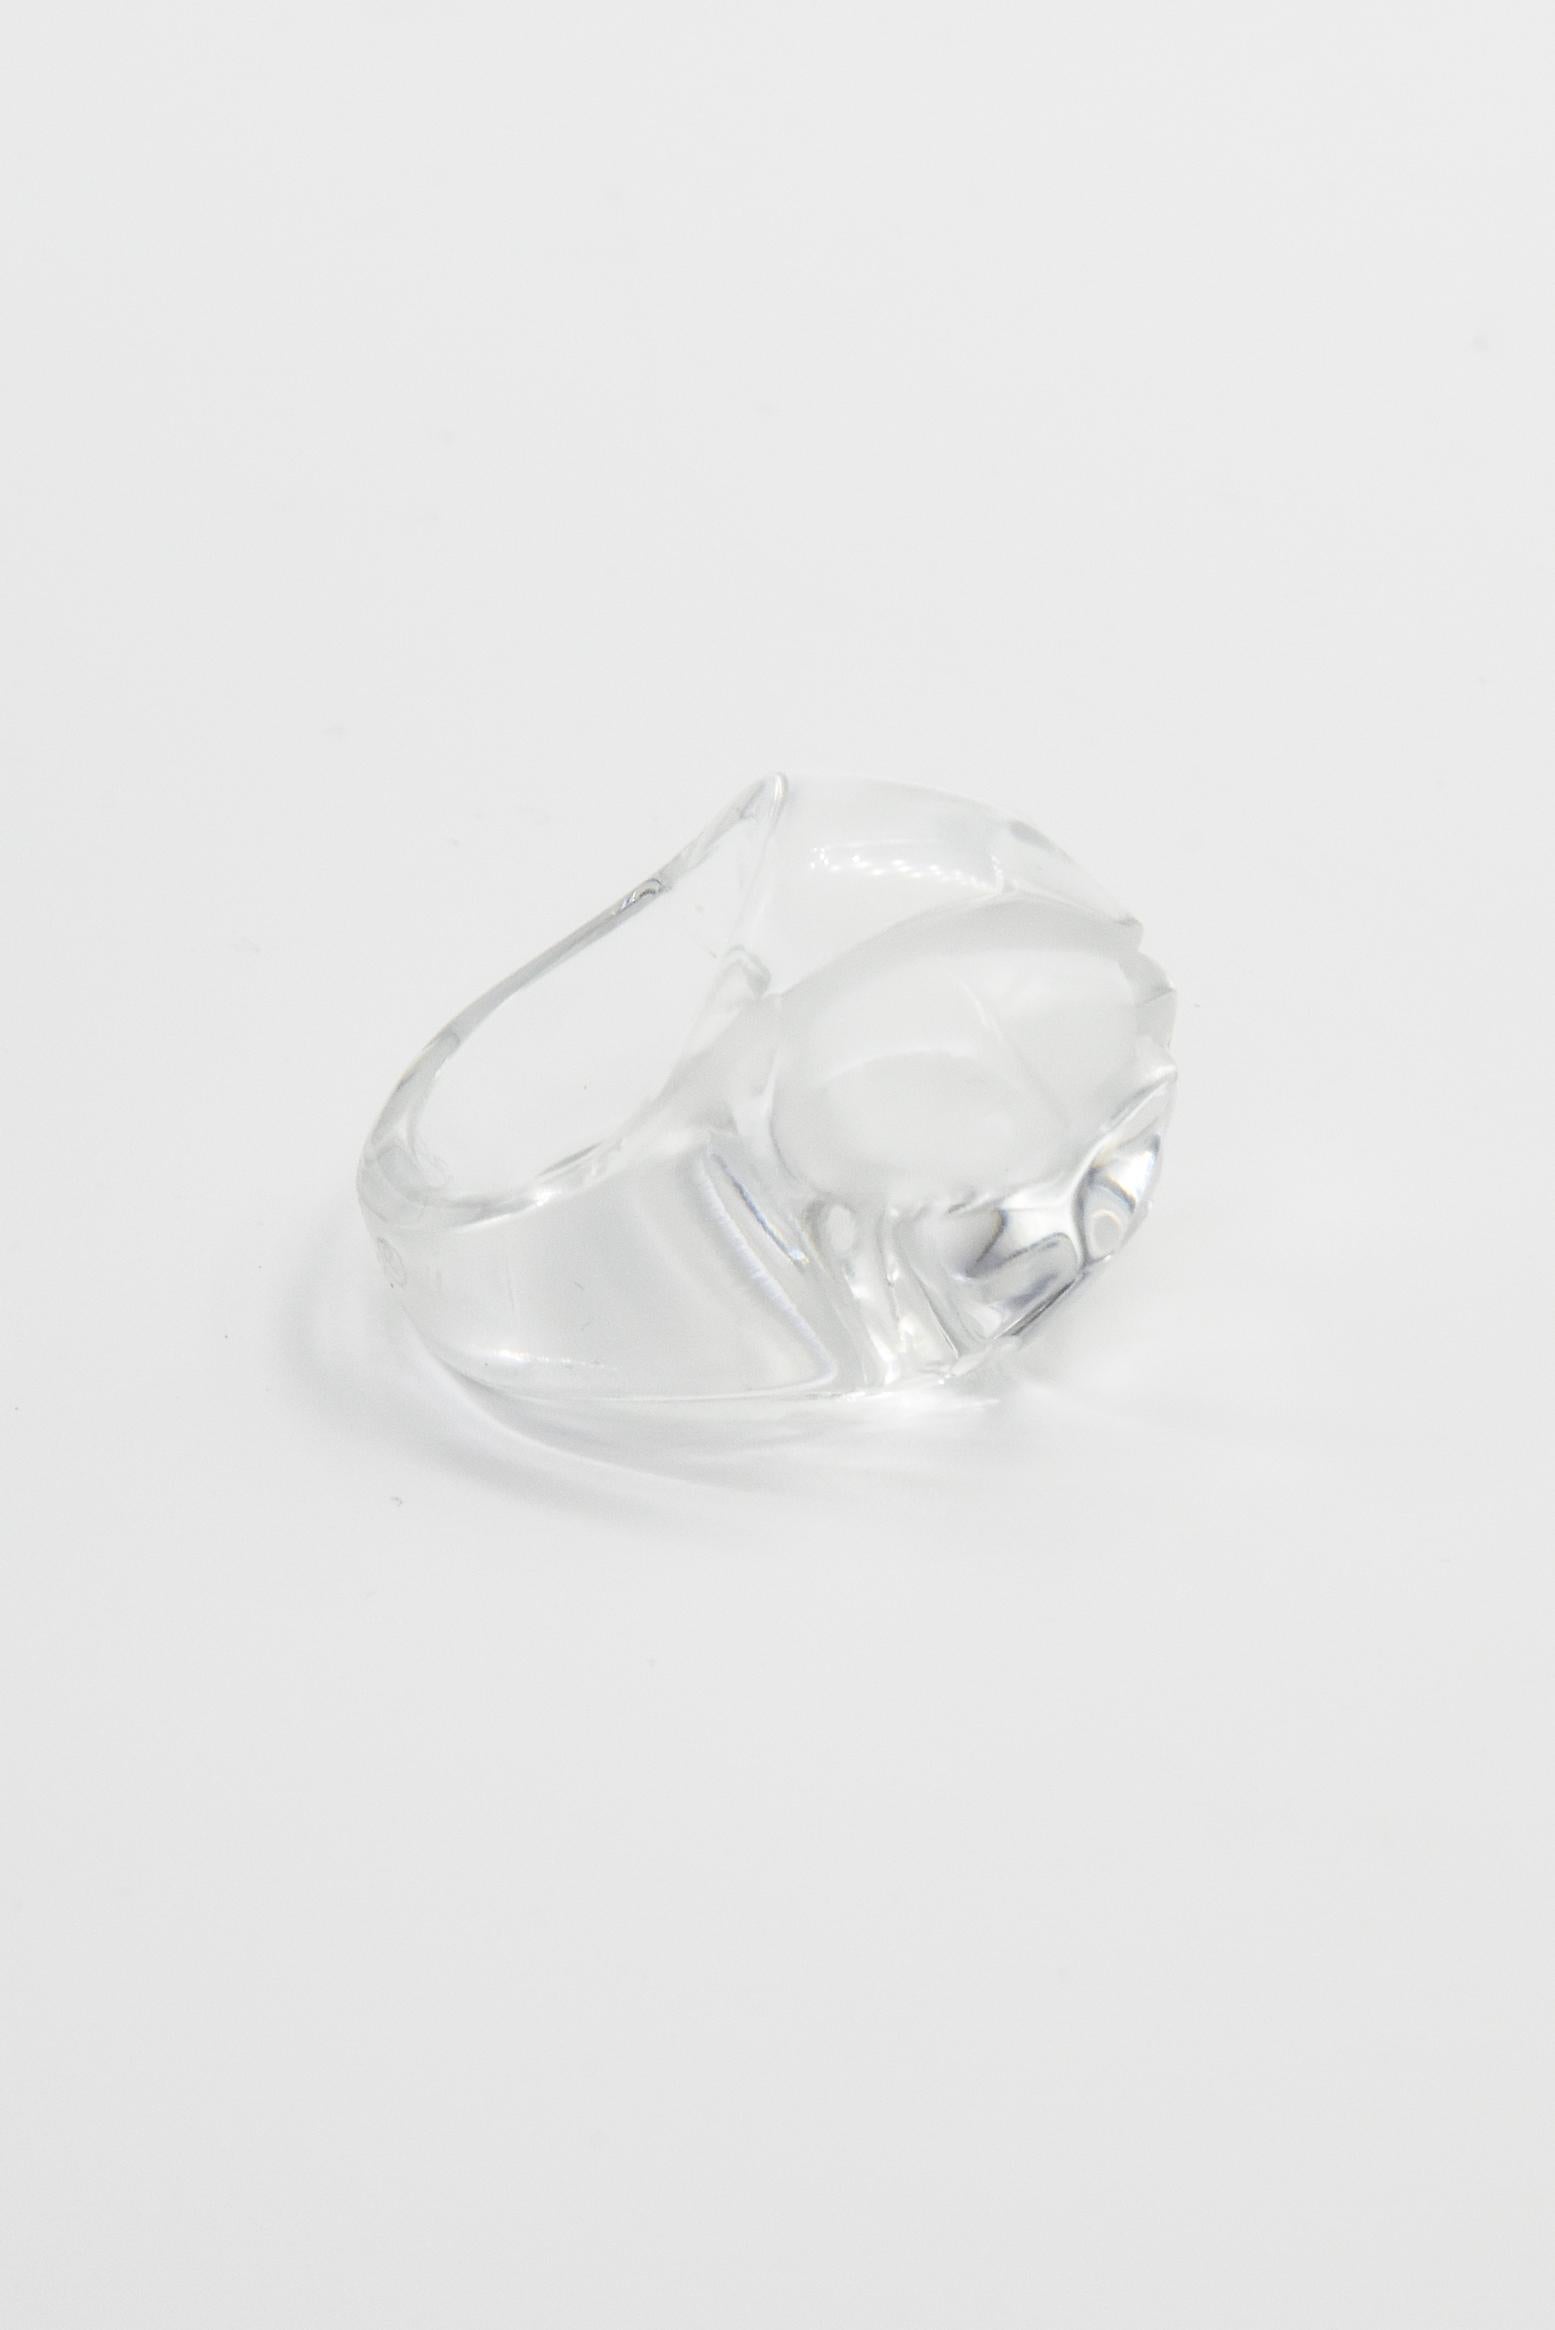 Women's or Men's Lalique Flower Fleur Ronces Clear Crystal Dome Ring in Box Size 6